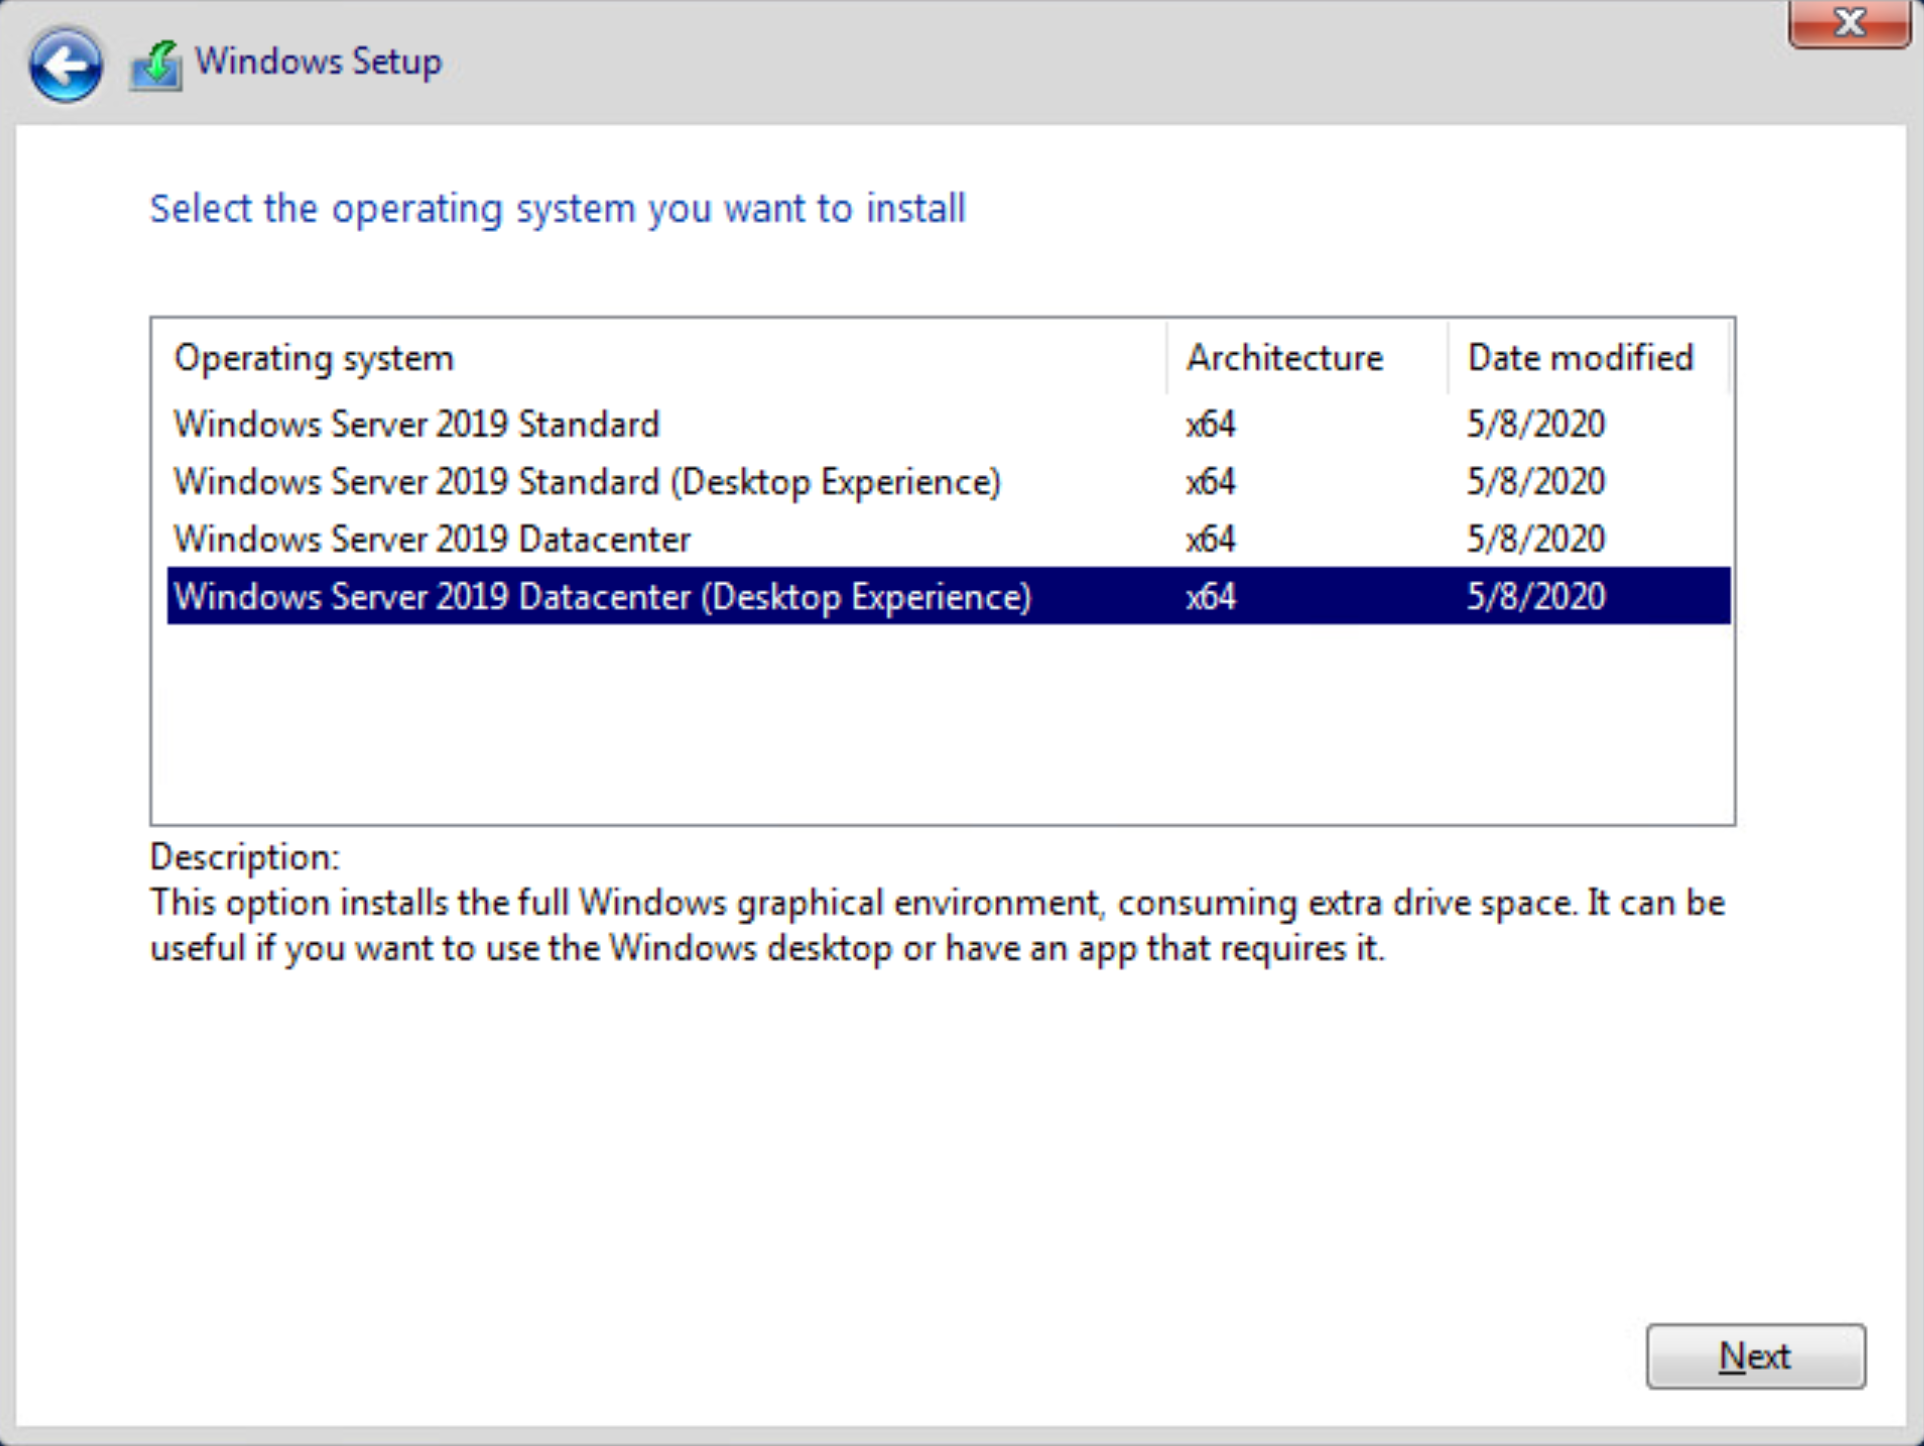 Screenshot of Windows Setup window where you select which operating system you want to install.